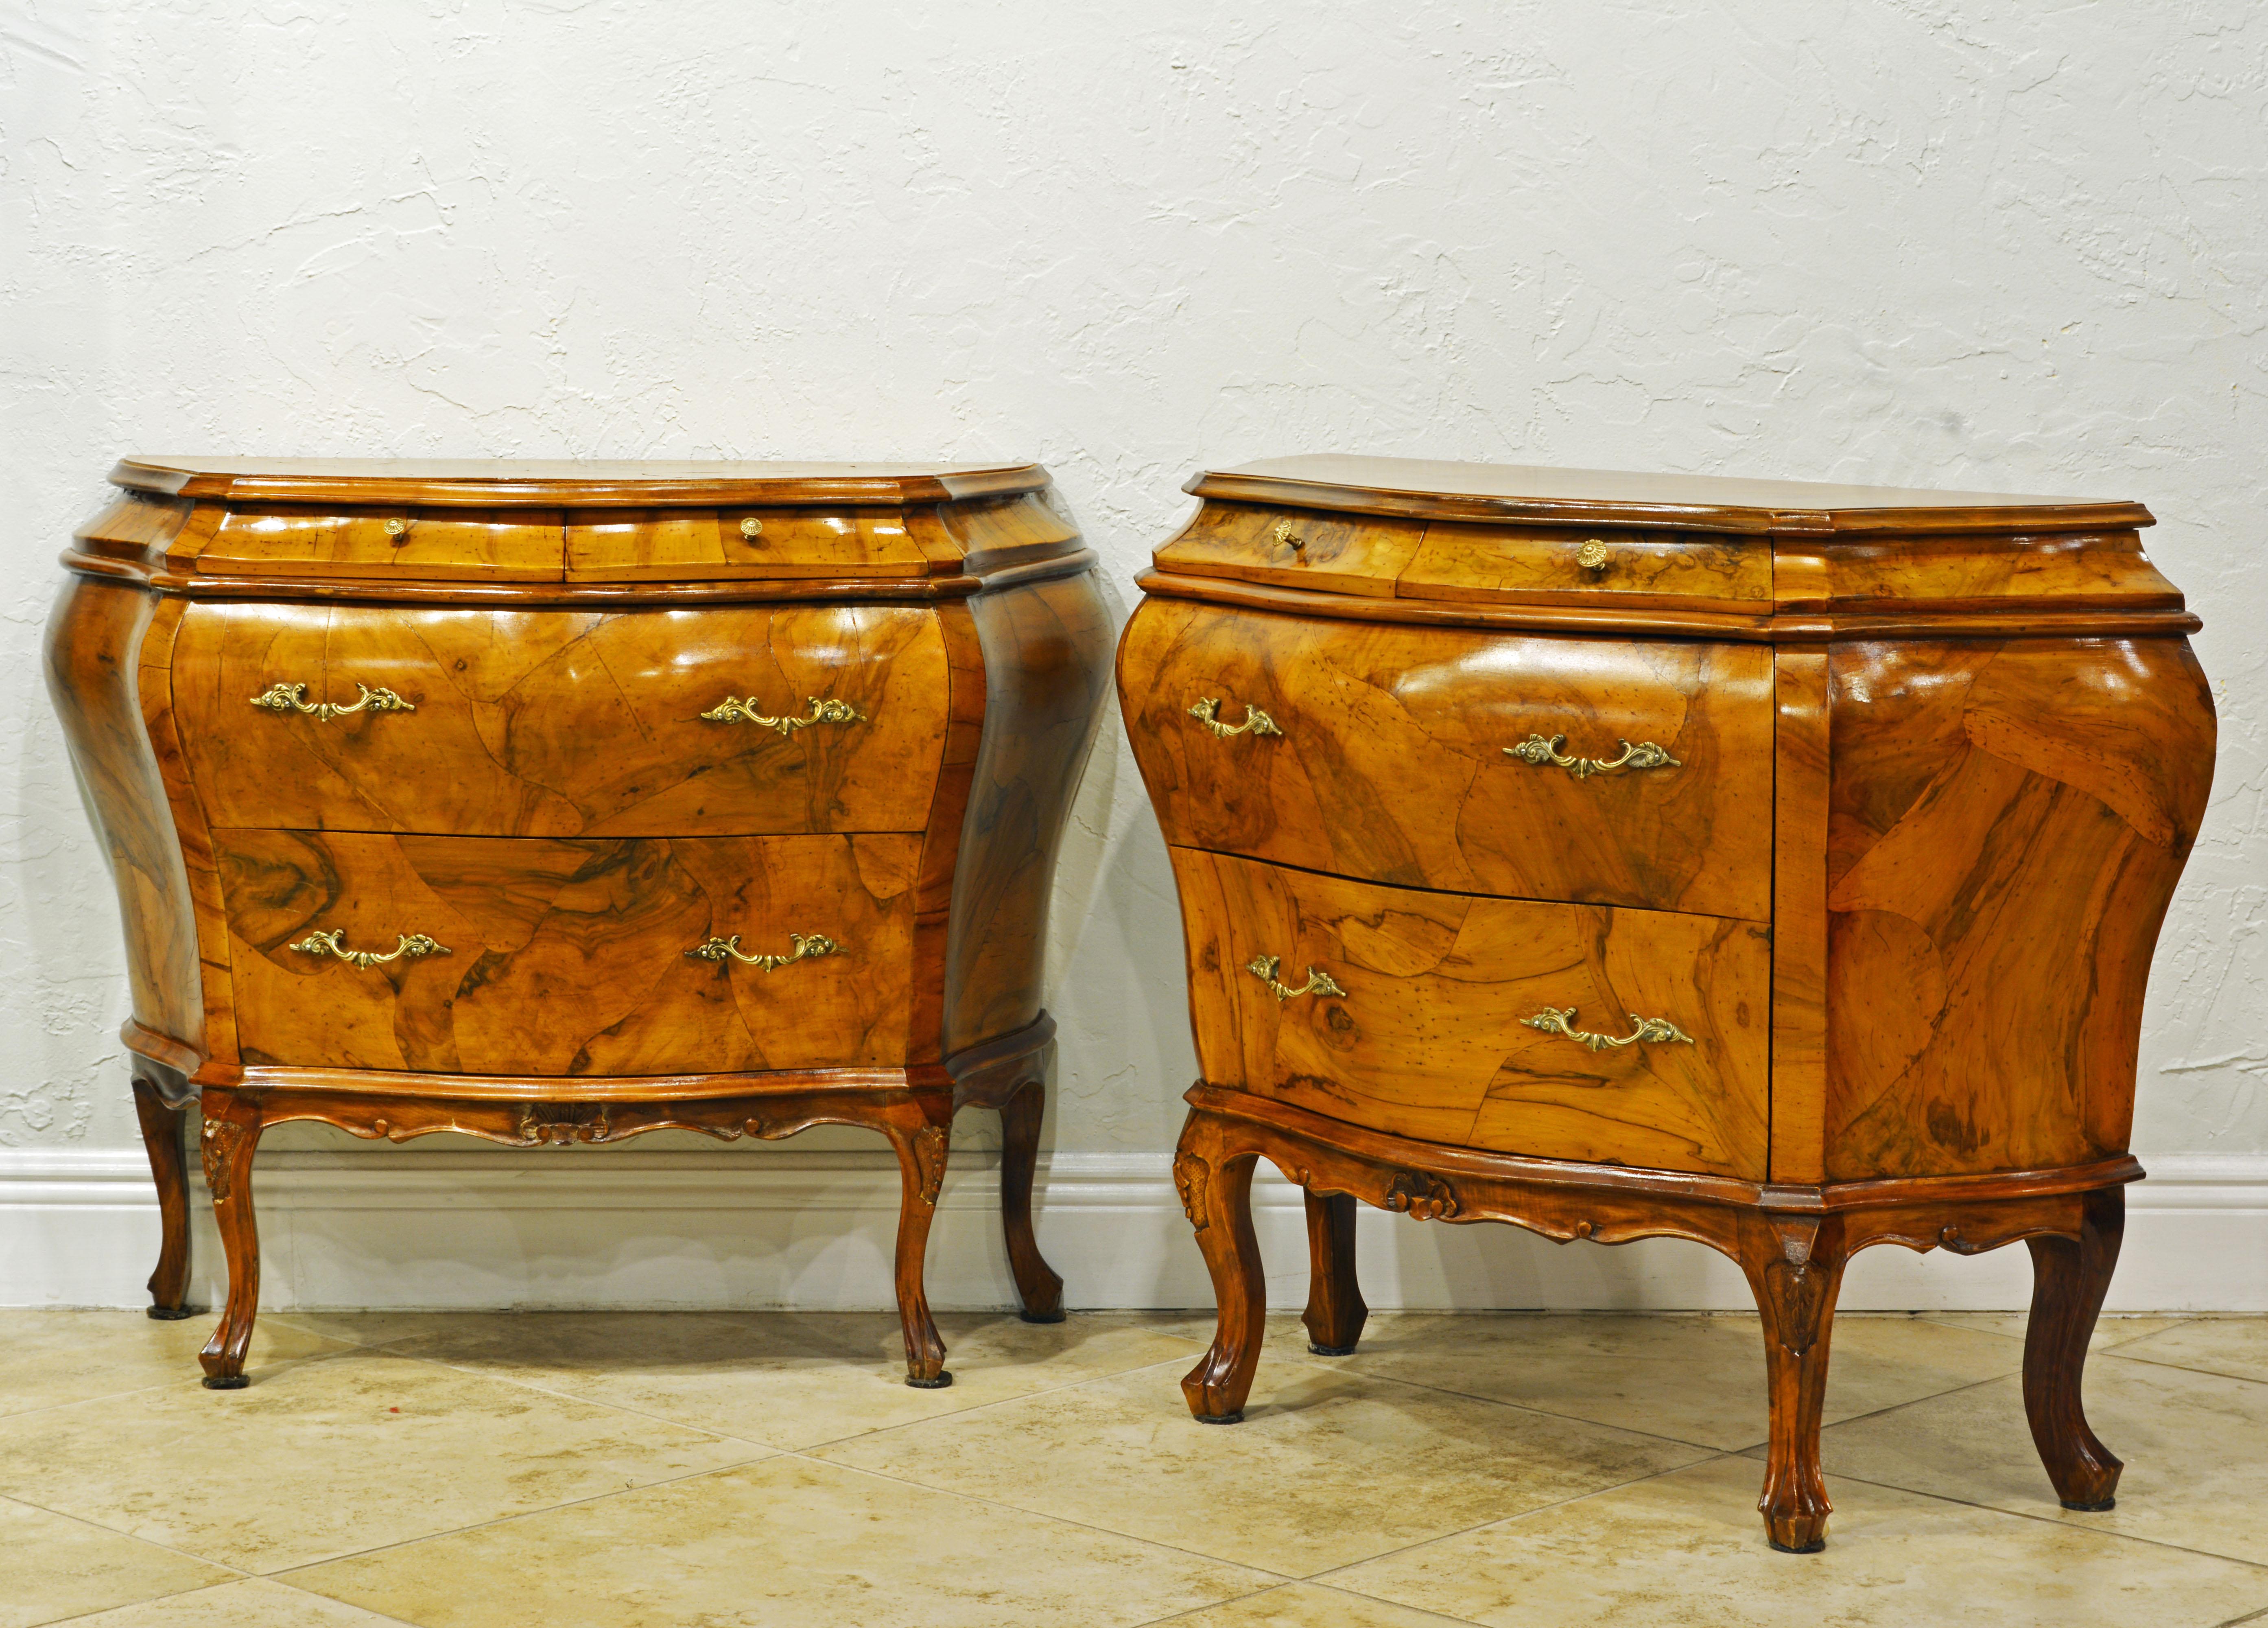 This attractive pair of mid-20th century Italian commodes feature well proportioned bombe forms with two short frieze drawers above the two long drawers and a scalloped carved apron resting on carved cabriole legs and mounted with Rococo style